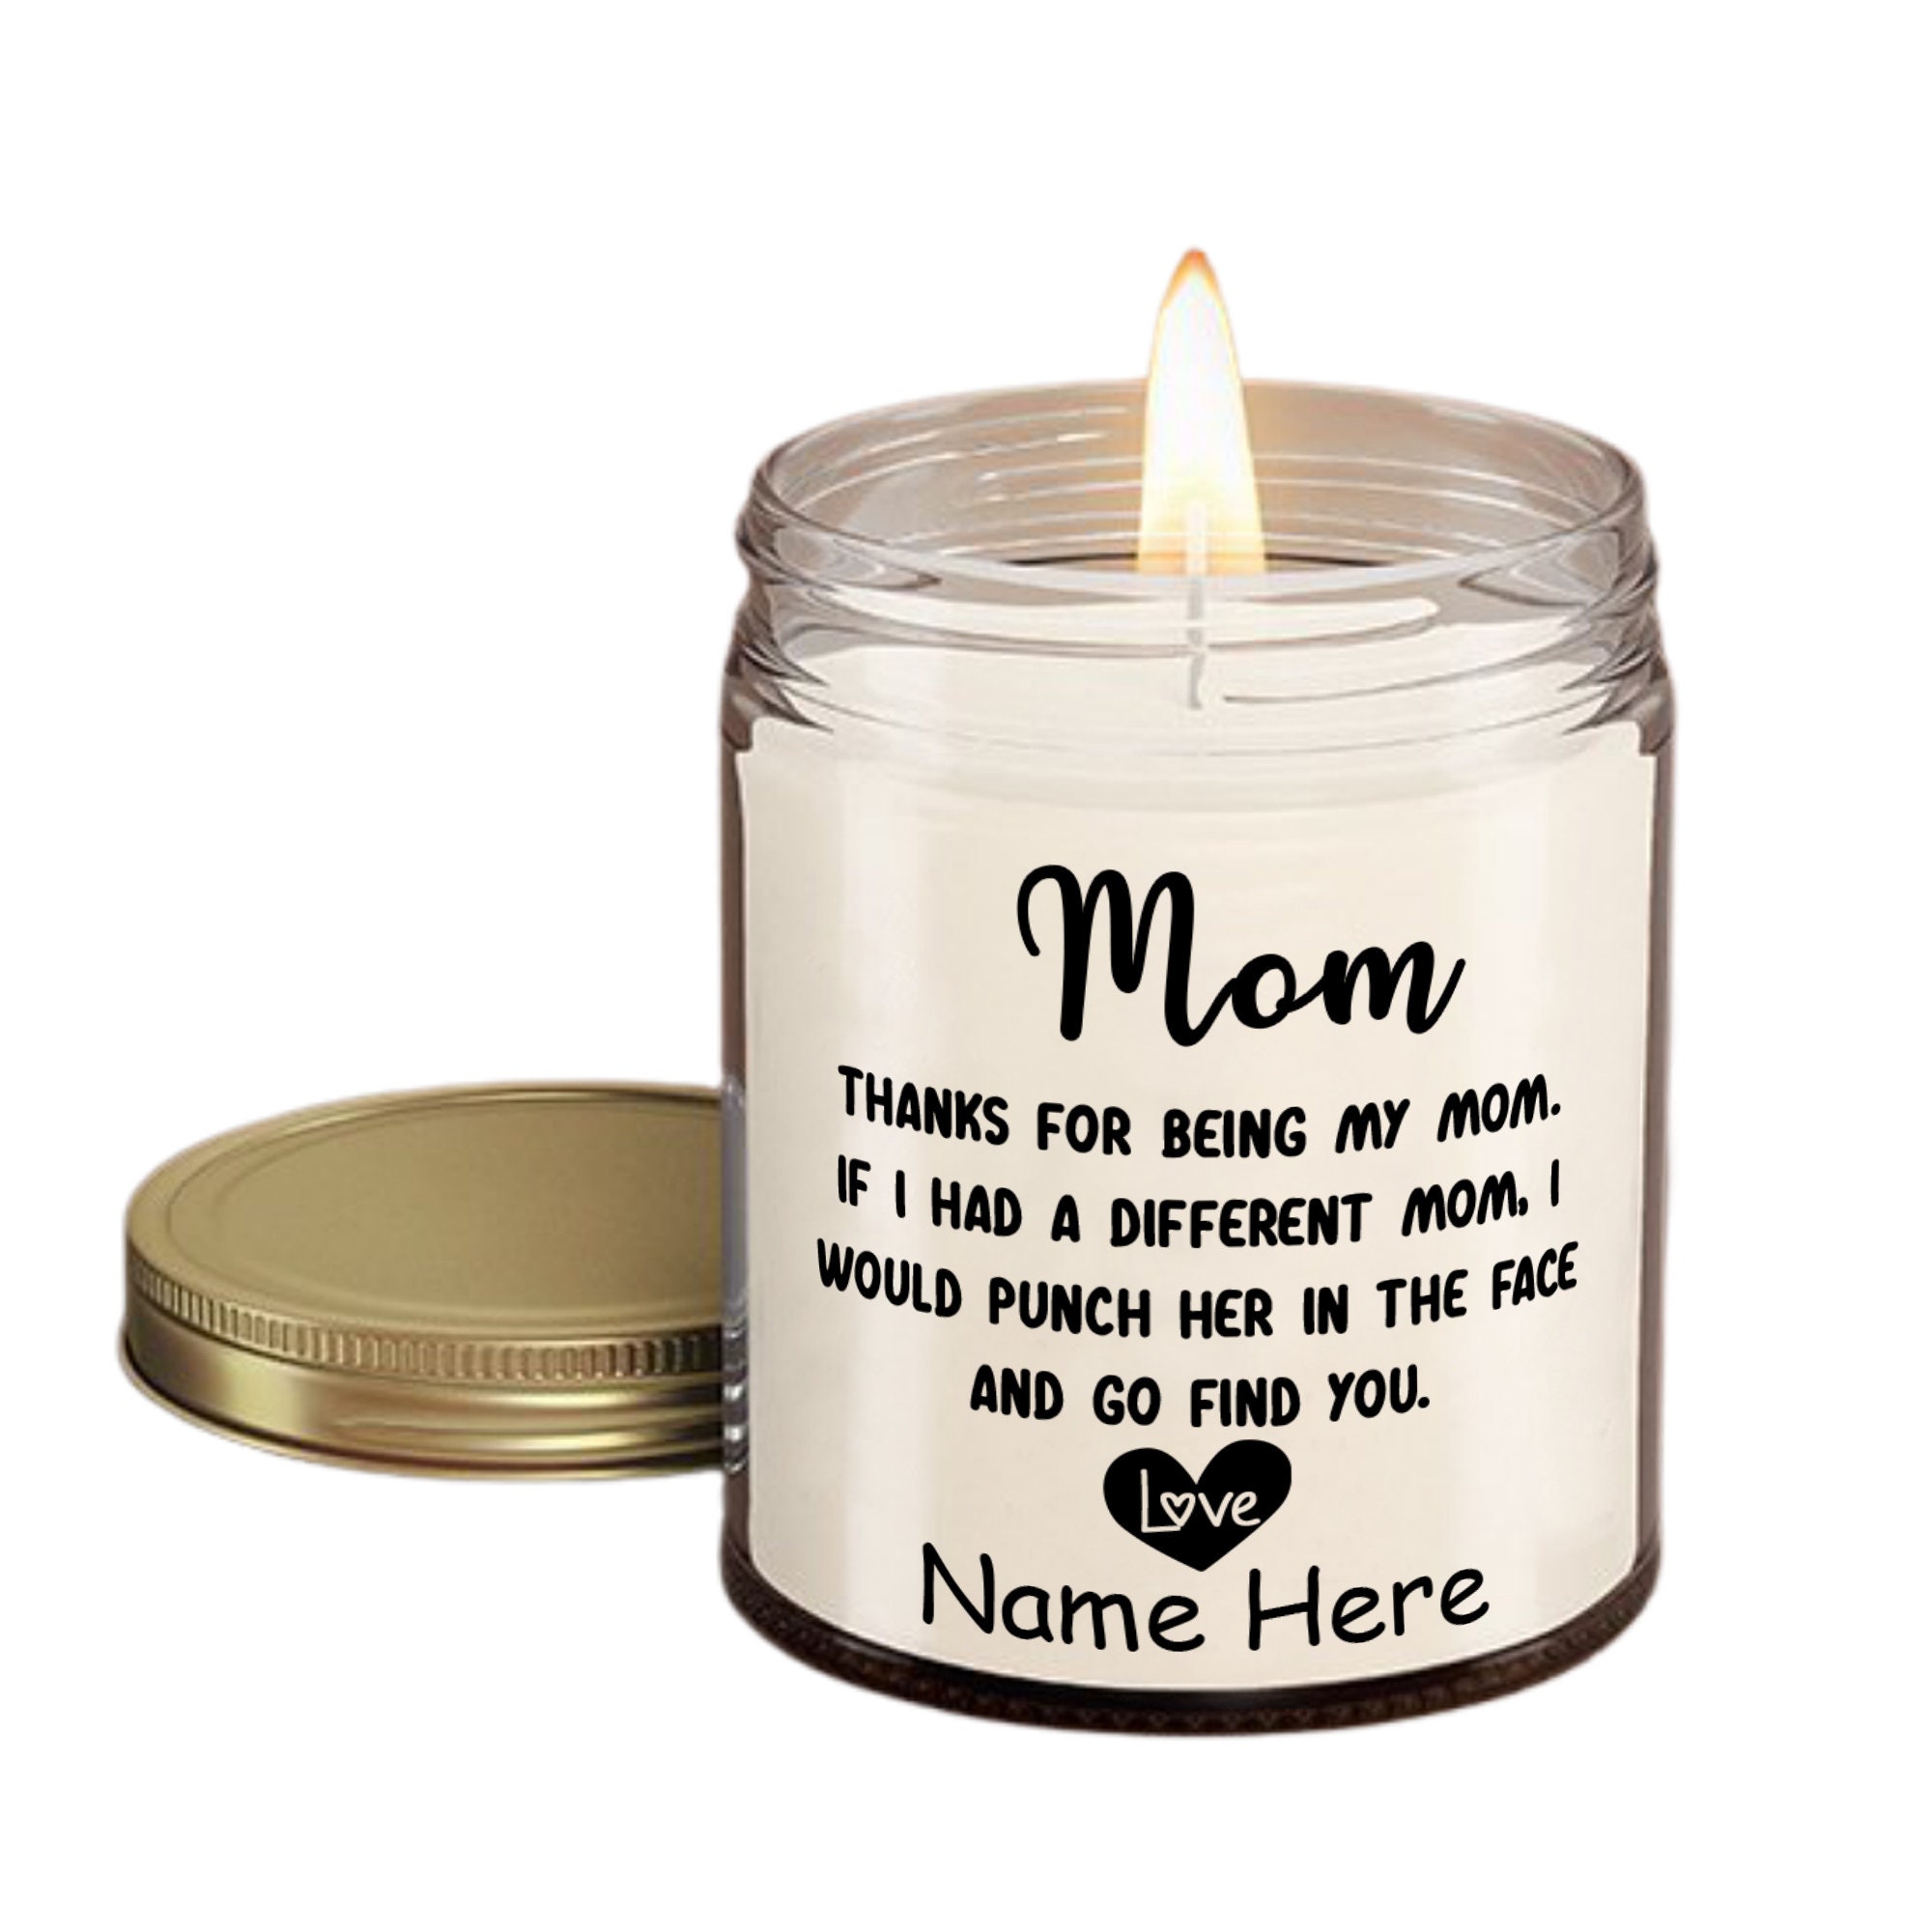 AharHora Funny Gifts for Mom, Mother's Day Candle Gifts for Women - Mom's  Last Nerve Candle - Gifts for Mom from Daughter, Son, Kid, Birthday Gifts